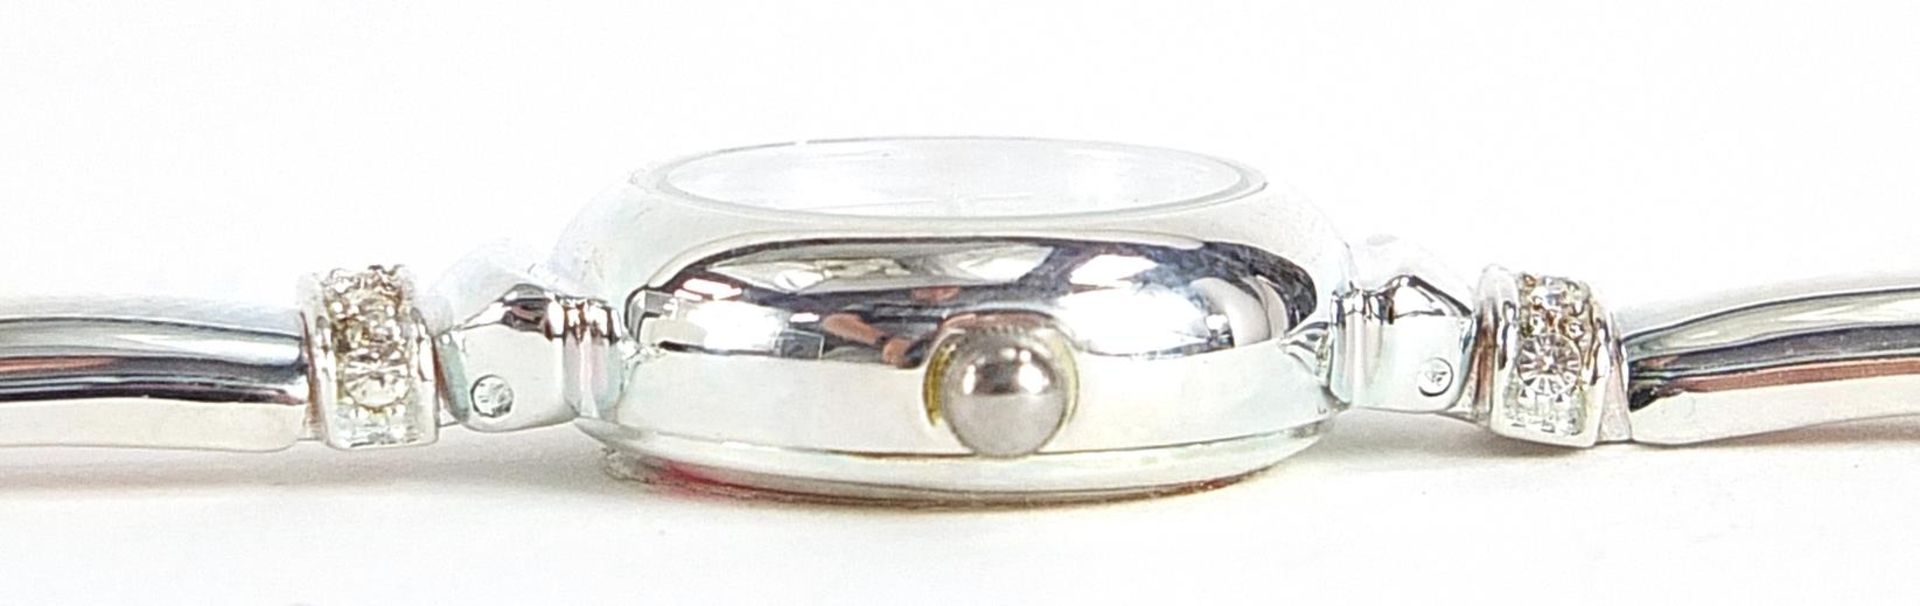 Carvel, ladies silver wristwatch set with clear stones, 19mm in diameter - Image 5 of 7